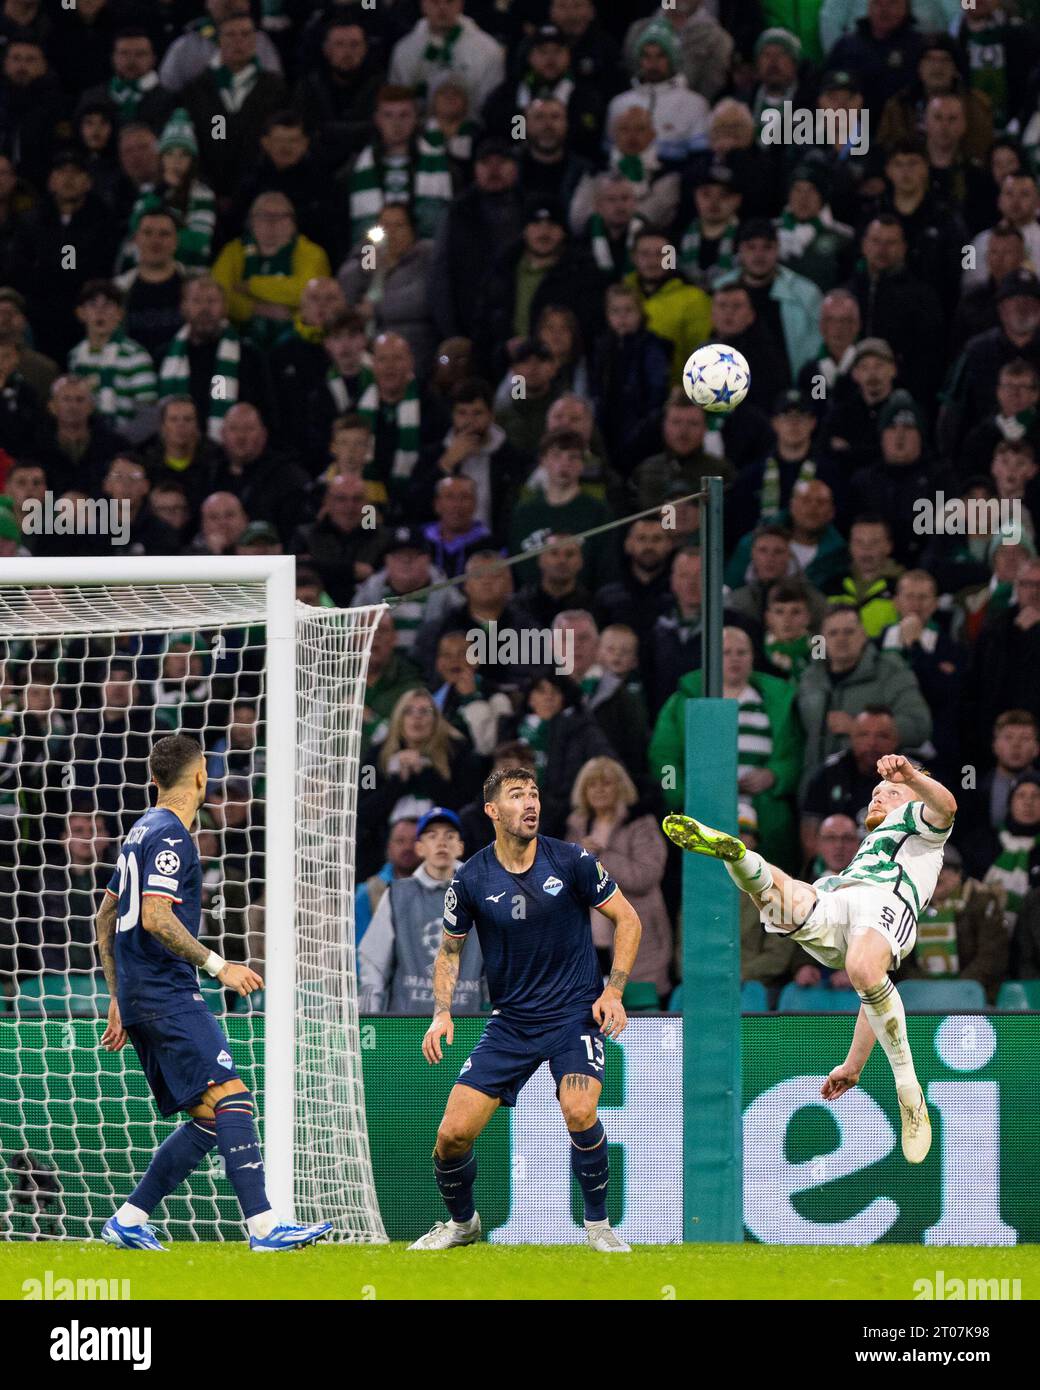 Glasgow, Scotland. 04 October 2023.  Liam Scales (5 - Celtic) takes the spectacular route to goal, but shoots wide of the mark  Celtic Vs Lazio - UEFA Champions League, Group E  Credit: Raymond Davies / Alamy Live News Stock Photo